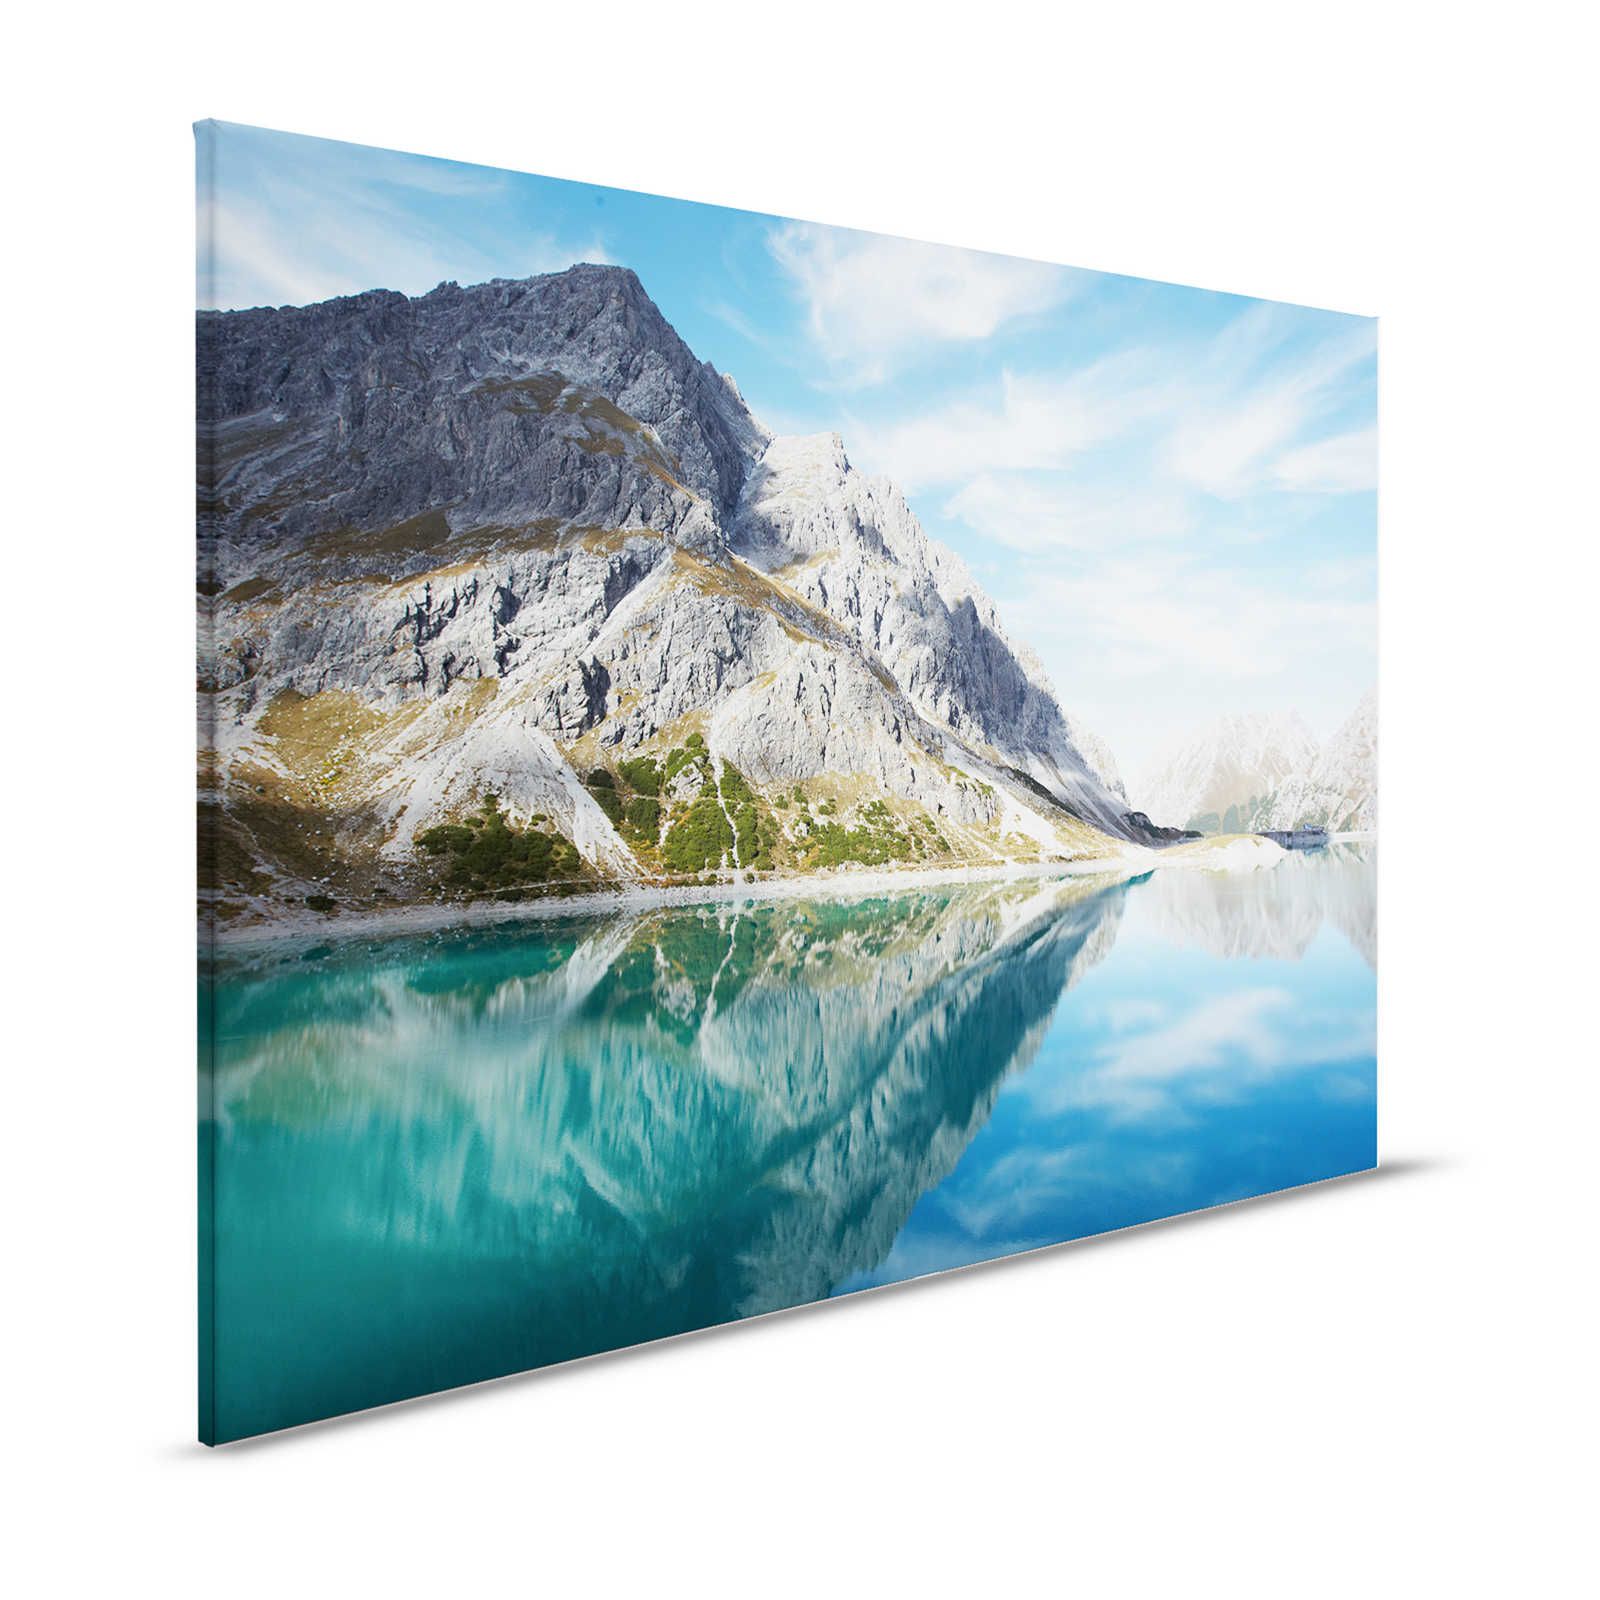 Mountain lake clear - Canvas painting with natural mountain panorama - 1.20 m x 0.80 m
